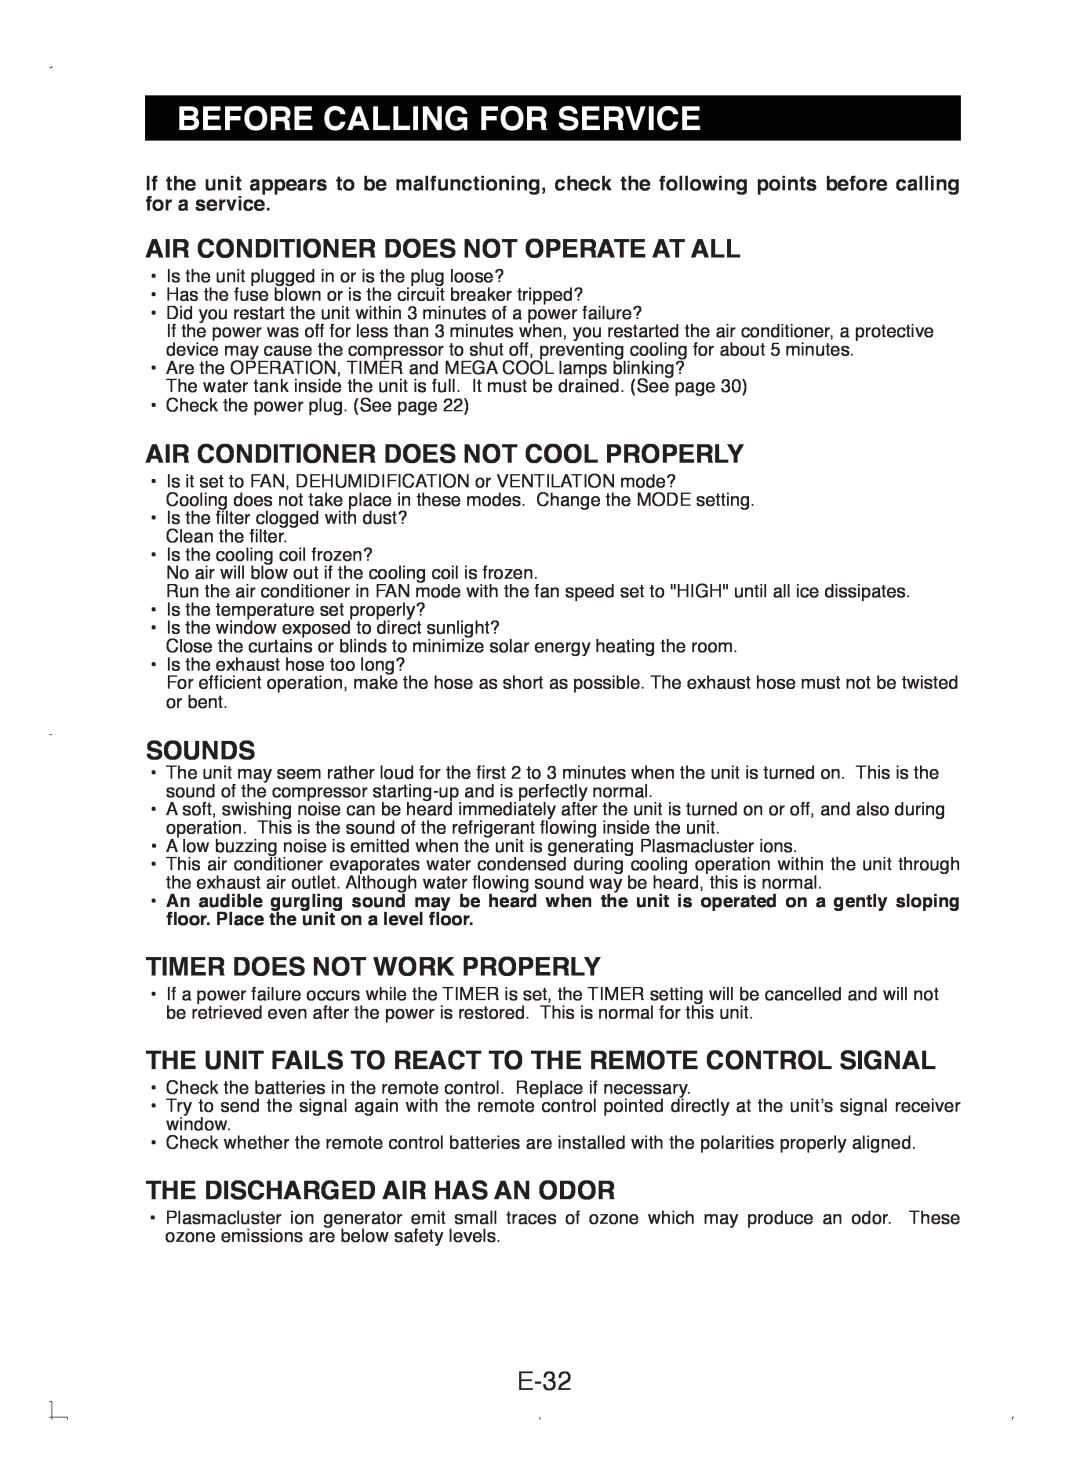 Sony CV-P12PX operation manual Before Calling For Service, E-32, Air Conditioner Does Not Operate At All, Sounds 